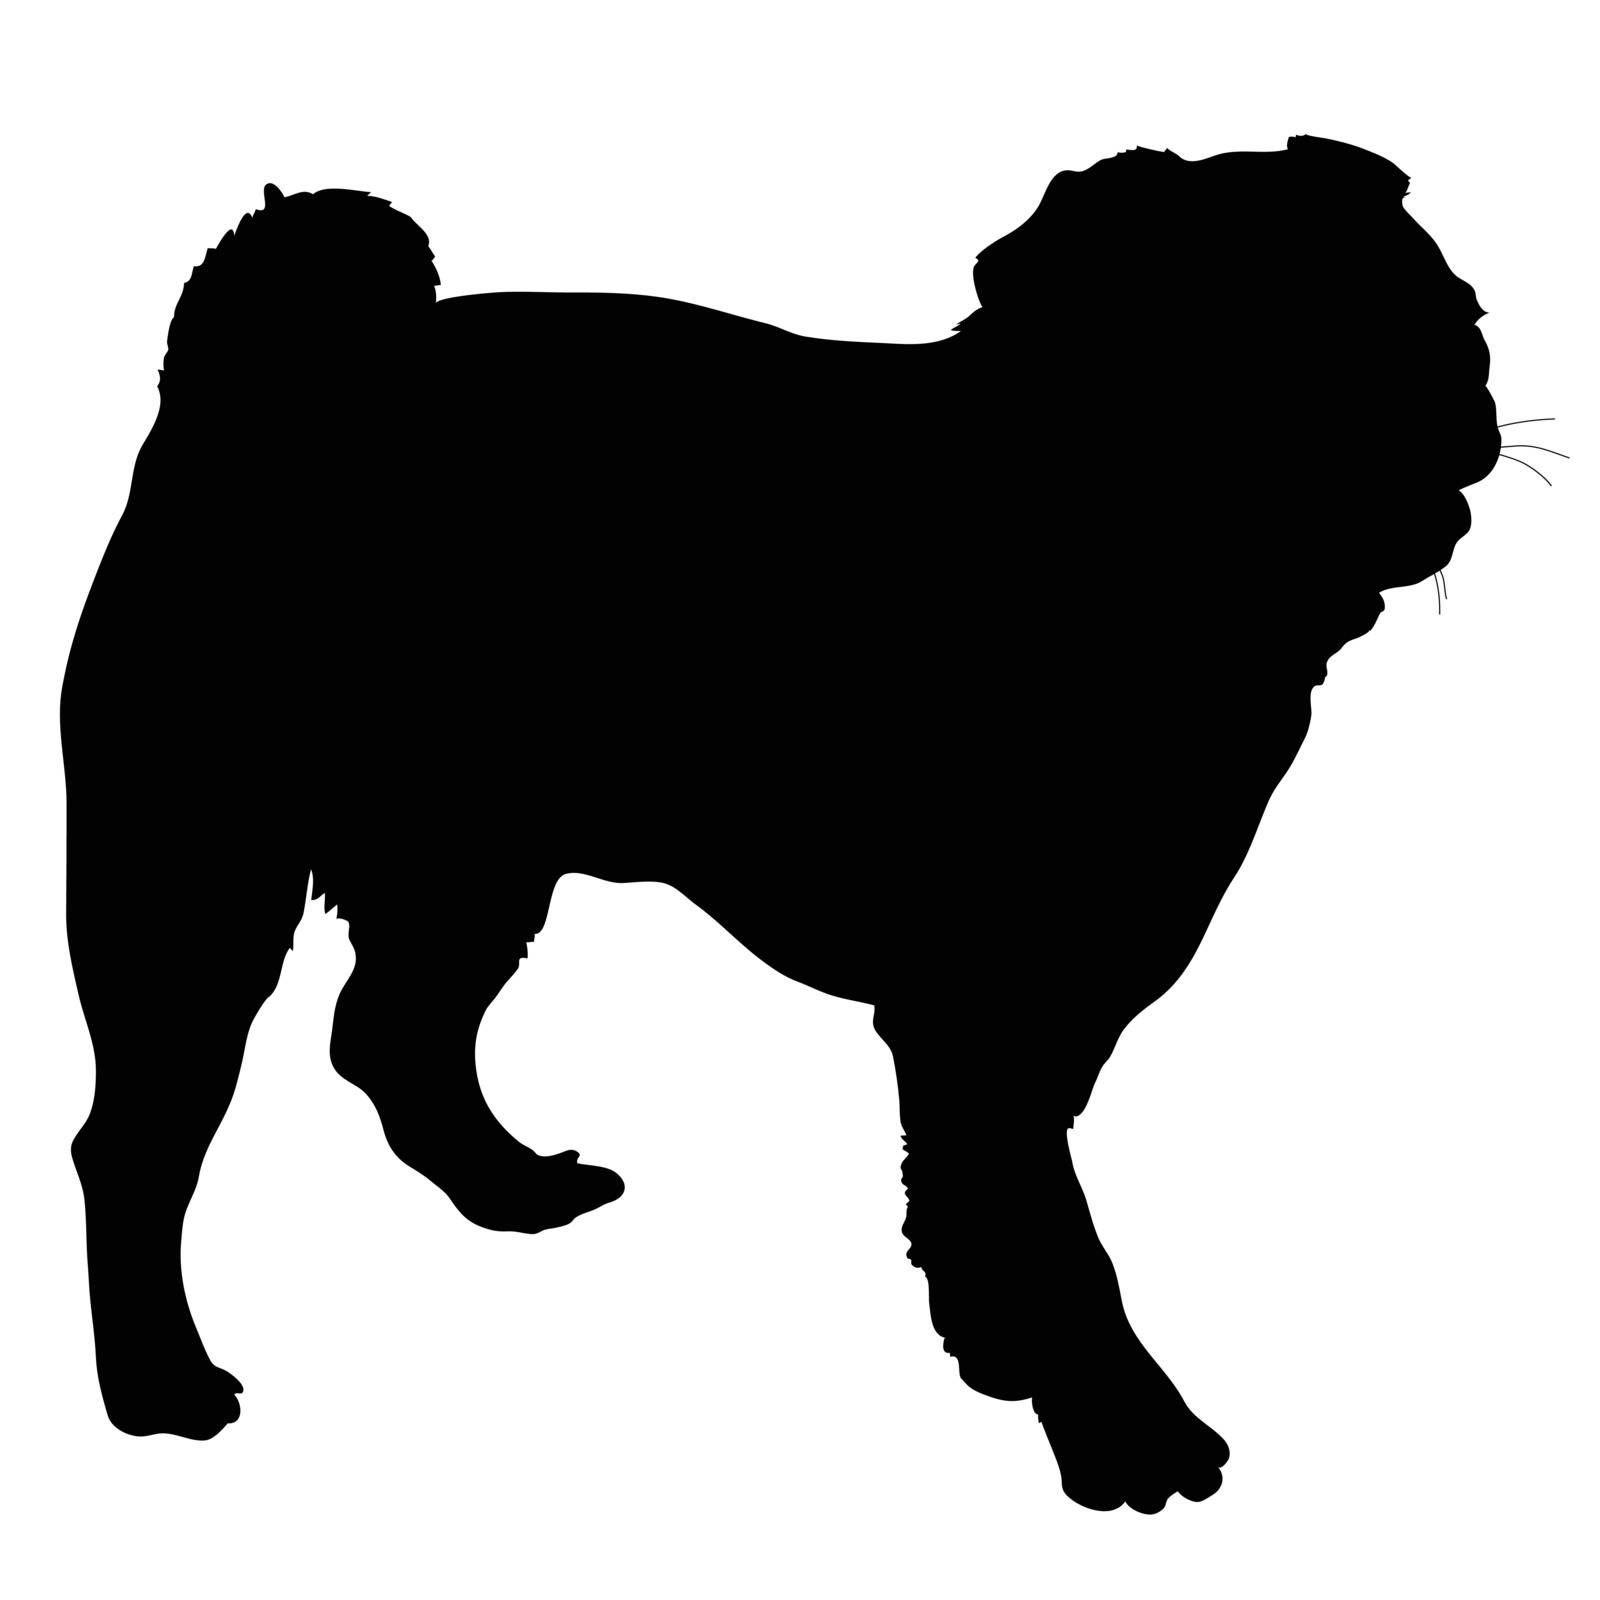 A black silhouette of a little pug dog